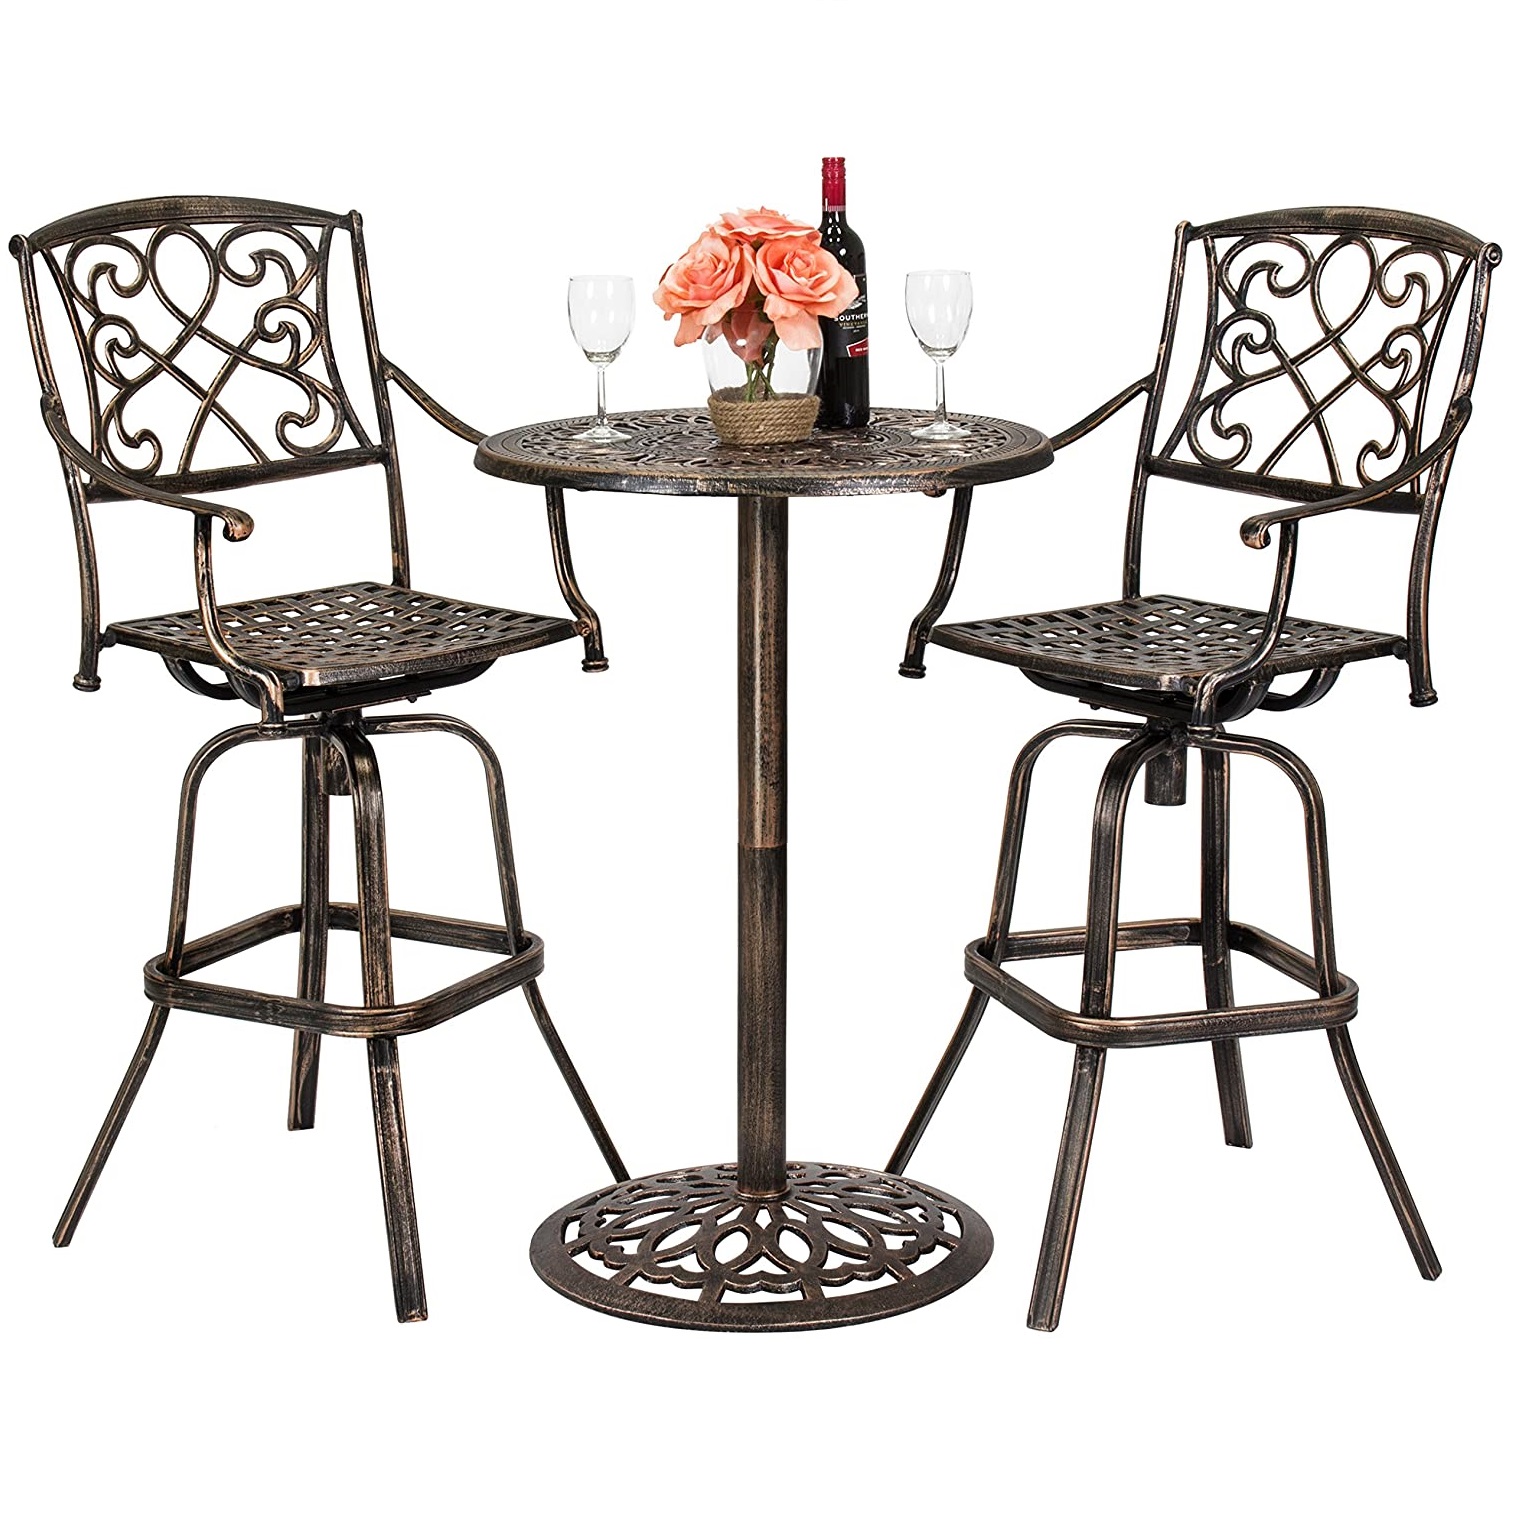 3-Piece Outdoor Cast Aluminum Bar Height Patio Bistro Set w/ 2 360-Swivel Chairs – Antique Copper Featured Image